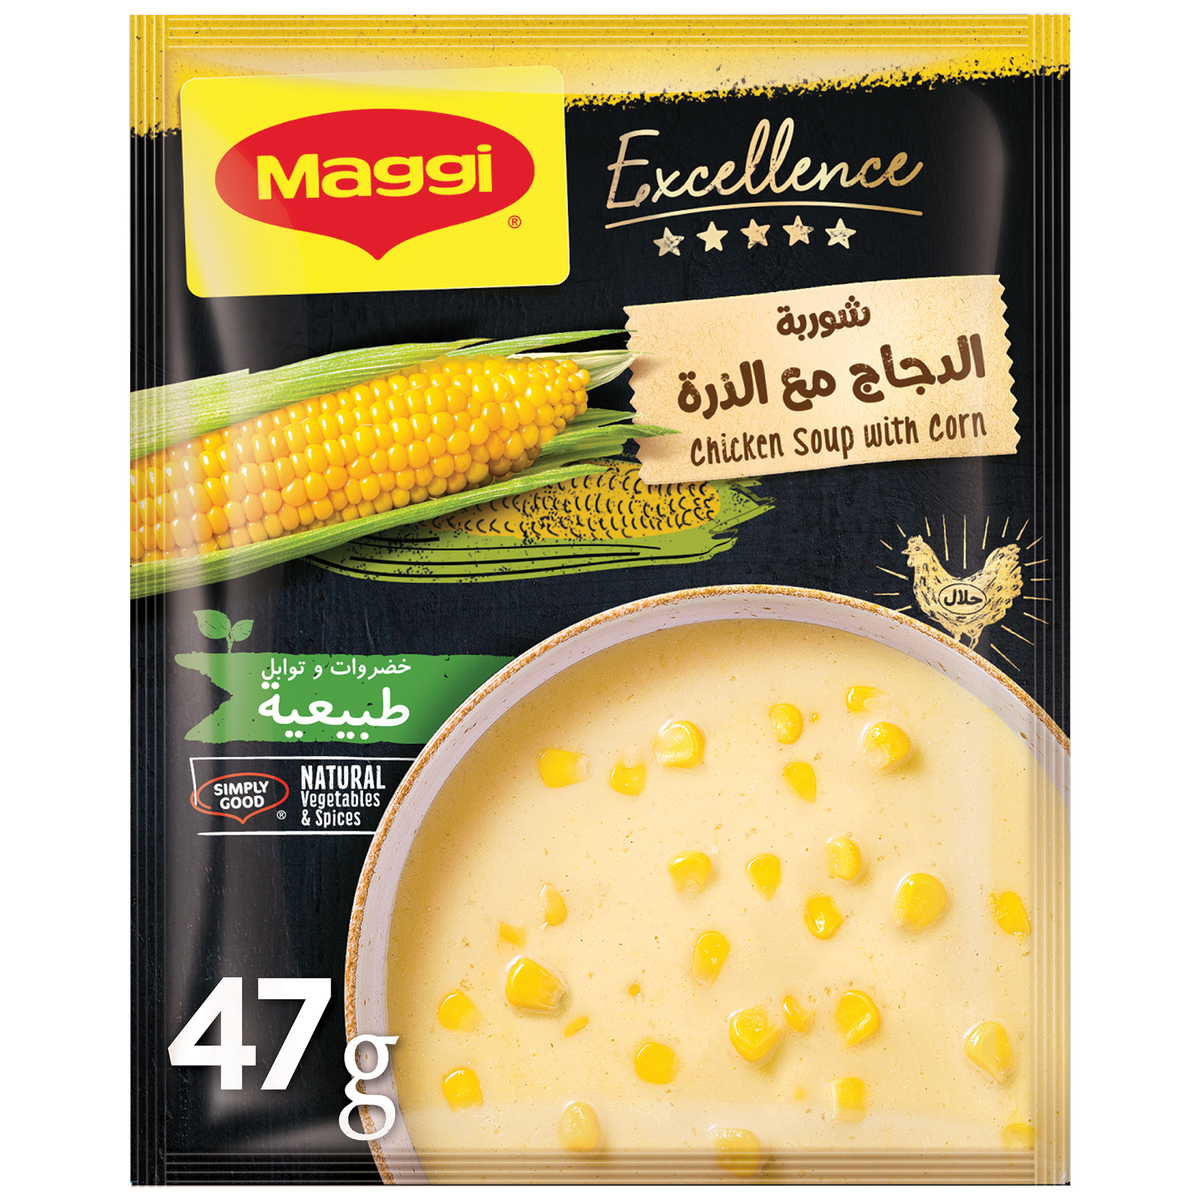 Maggi Excellence Chicken Soup With Corn 10 x 47 g